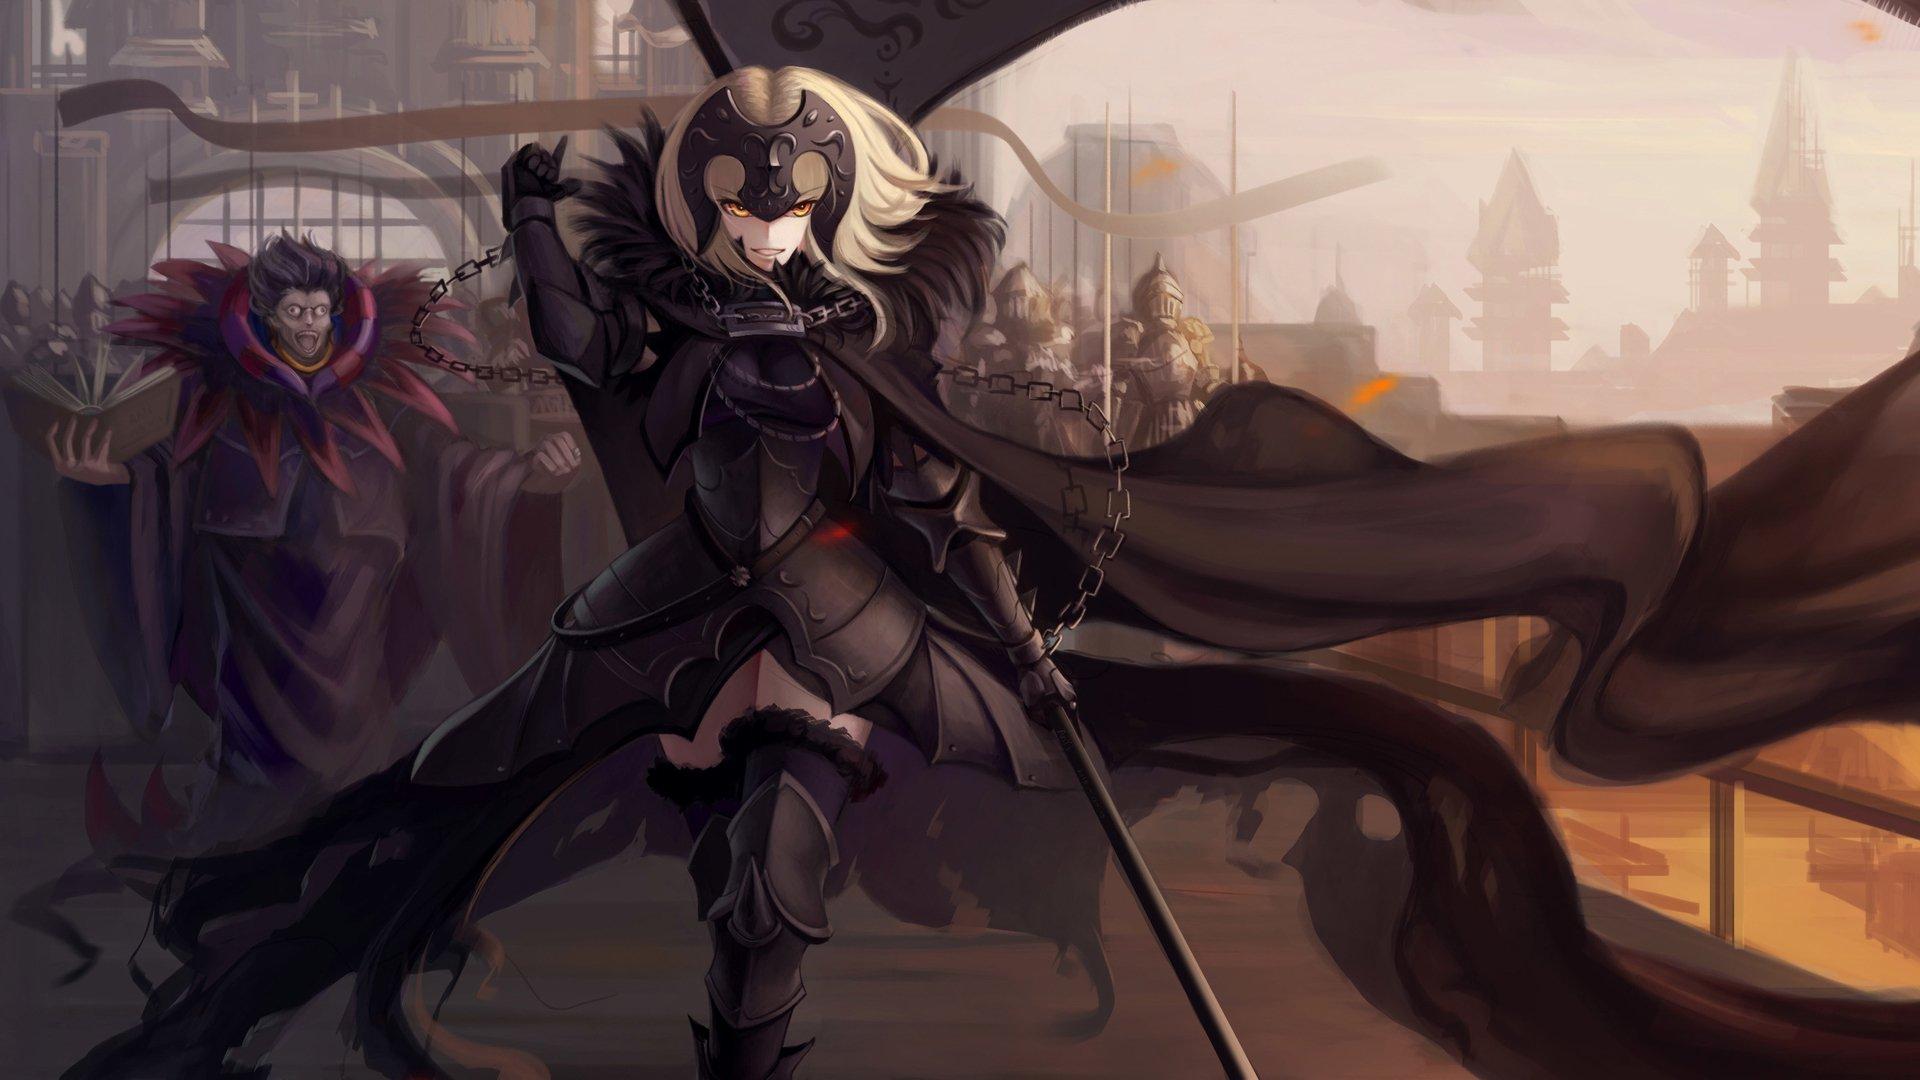 Jeanne d'Arc Alter HD Wallpaper and Background Image